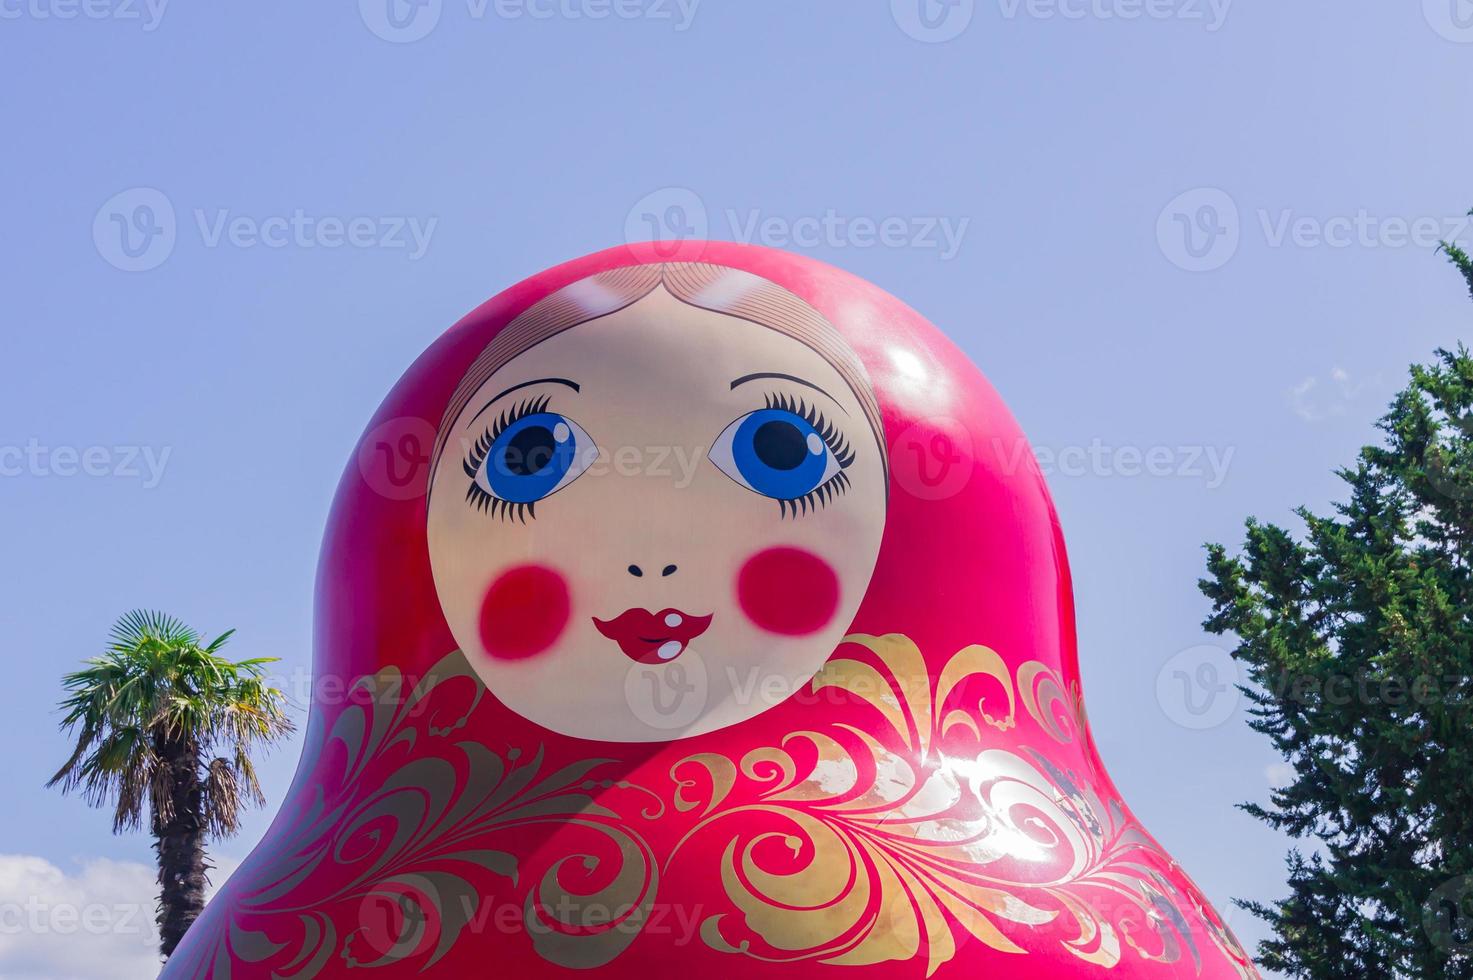 Giant russian matrioshka doll on the backgound of blue sky and palm trees photo